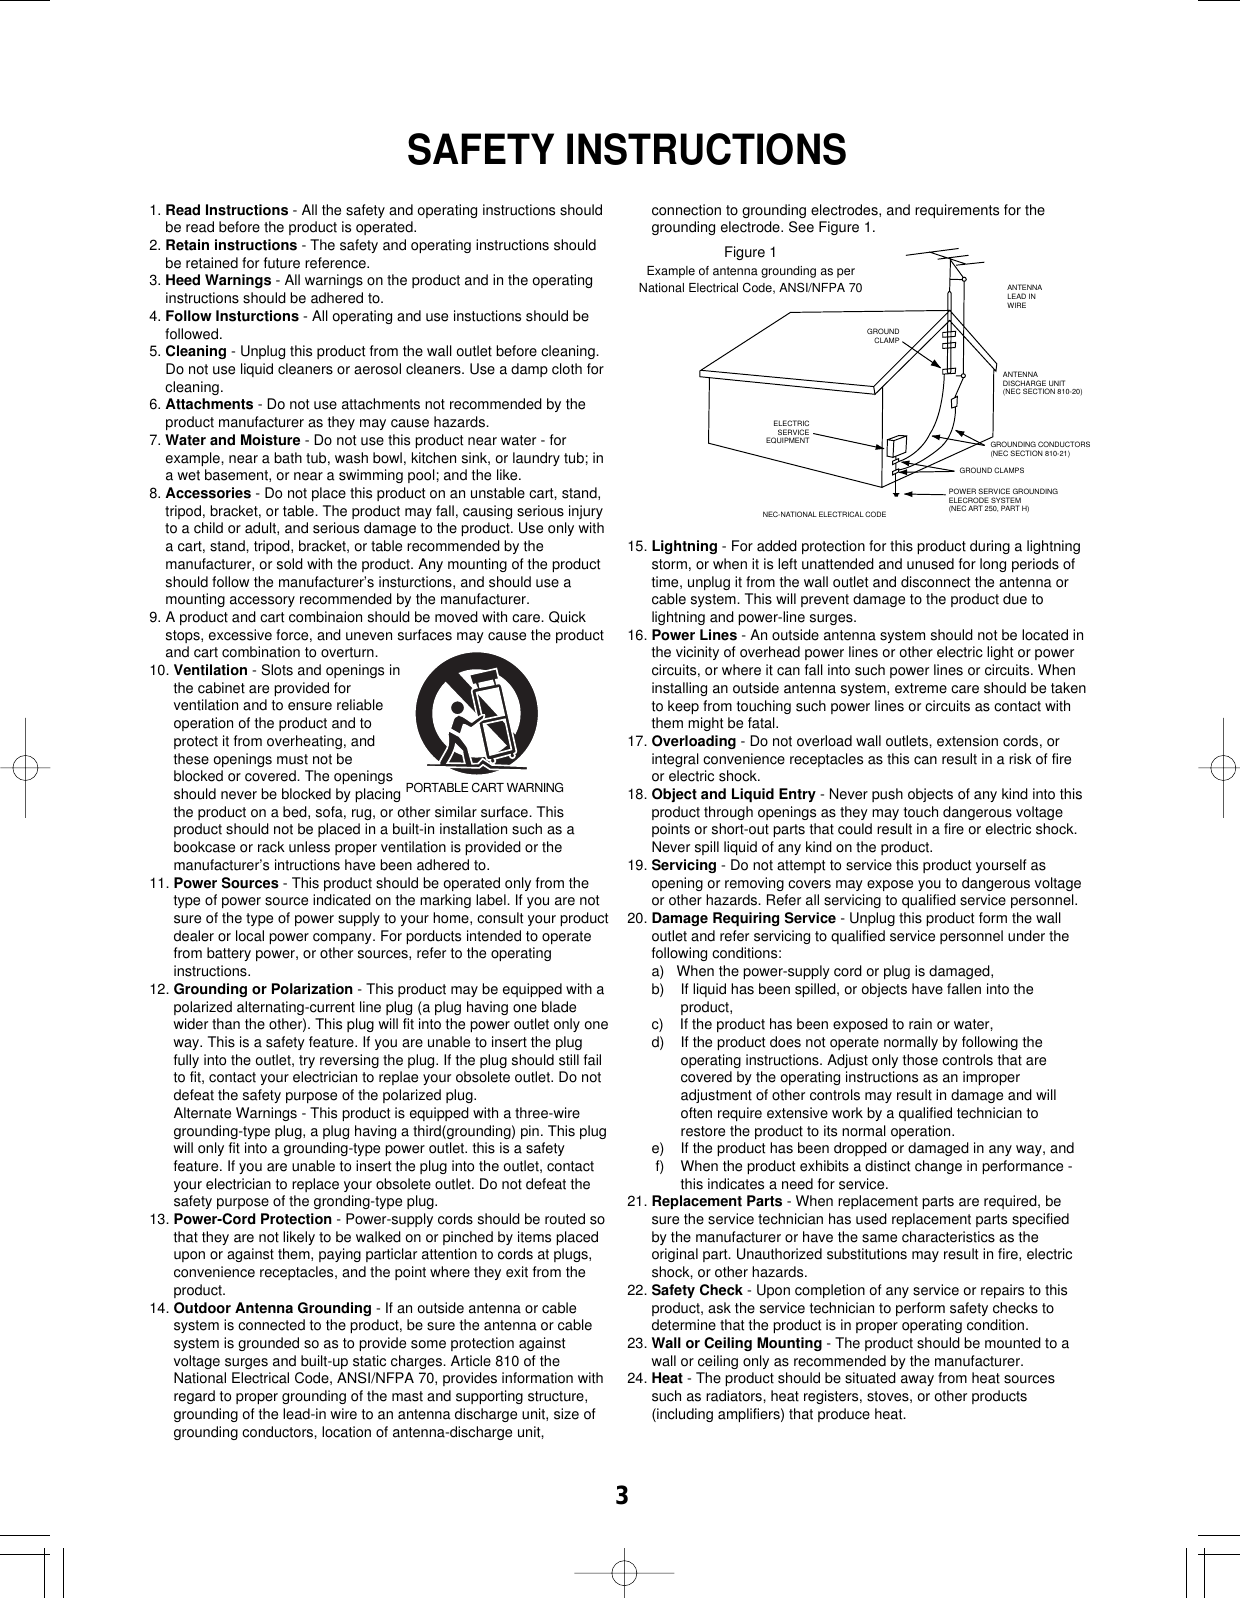 31. Read Instructions - All the safety and operating instructions shouldbe read before the product is operated.2. Retain instructions - The safety and operating instructions shouldbe retained for future reference.3. Heed Warnings - All warnings on the product and in the operatinginstructions should be adhered to.4. Follow Insturctions - All operating and use instuctions should befollowed.5. Cleaning - Unplug this product from the wall outlet before cleaning.Do not use liquid cleaners or aerosol cleaners. Use a damp cloth forcleaning.6. Attachments - Do not use attachments not recommended by theproduct manufacturer as they may cause hazards.7. Water and Moisture - Do not use this product near water - forexample, near a bath tub, wash bowl, kitchen sink, or laundry tub; ina wet basement, or near a swimming pool; and the like.8. Accessories - Do not place this product on an unstable cart, stand,tripod, bracket, or table. The product may fall, causing serious injuryto a child or adult, and serious damage to the product. Use only witha cart, stand, tripod, bracket, or table recommended by themanufacturer, or sold with the product. Any mounting of the productshould follow the manufacturer’s insturctions, and should use amounting accessory recommended by the manufacturer.9. A product and cart combinaion should be moved with care. Quickstops, excessive force, and uneven surfaces may cause the productand cart combination to overturn.10. Ventilation - Slots and openings inthe cabinet are provided forventilation and to ensure reliableoperation of the product and toprotect it from overheating, andthese openings must not beblocked or covered. The openingsshould never be blocked by placingthe product on a bed, sofa, rug, or other similar surface. Thisproduct should not be placed in a built-in installation such as abookcase or rack unless proper ventilation is provided or themanufacturer’s intructions have been adhered to.11. Power Sources - This product should be operated only from thetype of power source indicated on the marking label. If you are notsure of the type of power supply to your home, consult your productdealer or local power company. For porducts intended to operatefrom battery power, or other sources, refer to the operatinginstructions.12. Grounding or Polarization - This product may be equipped with apolarized alternating-current line plug (a plug having one bladewider than the other). This plug will fit into the power outlet only oneway. This is a safety feature. If you are unable to insert the plugfully into the outlet, try reversing the plug. If the plug should still failto fit, contact your electrician to replae your obsolete outlet. Do notdefeat the safety purpose of the polarized plug.Alternate Warnings - This product is equipped with a three-wiregrounding-type plug, a plug having a third(grounding) pin. This plugwill only fit into a grounding-type power outlet. this is a safetyfeature. If you are unable to insert the plug into the outlet, contactyour electrician to replace your obsolete outlet. Do not defeat thesafety purpose of the gronding-type plug.13. Power-Cord Protection - Power-supply cords should be routed sothat they are not likely to be walked on or pinched by items placedupon or against them, paying particlar attention to cords at plugs,convenience receptacles, and the point where they exit from theproduct.14. Outdoor Antenna Grounding - If an outside antenna or cablesystem is connected to the product, be sure the antenna or cablesystem is grounded so as to provide some protection againstvoltage surges and built-up static charges. Article 810 of theNational Electrical Code, ANSI/NFPA 70, provides information withregard to proper grounding of the mast and supporting structure,grounding of the lead-in wire to an antenna discharge unit, size ofgrounding conductors, location of antenna-discharge unit,connection to grounding electrodes, and requirements for thegrounding electrode. See Figure 1.15. Lightning - For added protection for this product during a lightningstorm, or when it is left unattended and unused for long periods oftime, unplug it from the wall outlet and disconnect the antenna orcable system. This will prevent damage to the product due tolightning and power-line surges.16. Power Lines - An outside antenna system should not be located inthe vicinity of overhead power lines or other electric light or powercircuits, or where it can fall into such power lines or circuits. Wheninstalling an outside antenna system, extreme care should be takento keep from touching such power lines or circuits as contact withthem might be fatal.17. Overloading - Do not overload wall outlets, extension cords, orintegral convenience receptacles as this can result in a risk of fireor electric shock.18. Object and Liquid Entry - Never push objects of any kind into thisproduct through openings as they may touch dangerous voltagepoints or short-out parts that could result in a fire or electric shock.Never spill liquid of any kind on the product.19. Servicing - Do not attempt to service this product yourself asopening or removing covers may expose you to dangerous voltageor other hazards. Refer all servicing to qualified service personnel.20. Damage Requiring Service - Unplug this product form the walloutlet and refer servicing to qualified service personnel under thefollowing conditions:a)   When the power-supply cord or plug is damaged,b)    If liquid has been spilled, or objects have fallen into theproduct,c)    If the product has been exposed to rain or water,d)    If the product does not operate normally by following theoperating instructions. Adjust only those controls that arecovered by the operating instructions as an improperadjustment of other controls may result in damage and willoften require extensive work by a qualified technician torestore the product to its normal operation.e)    If the product has been dropped or damaged in any way, andf)    When the product exhibits a distinct change in performance -this indicates a need for service.21. Replacement Parts - When replacement parts are required, besure the service technician has used replacement parts specifiedby the manufacturer or have the same characteristics as theoriginal part. Unauthorized substitutions may result in fire, electricshock, or other hazards.22. Safety Check - Upon completion of any service or repairs to thisproduct, ask the service technician to perform safety checks todetermine that the product is in proper operating condition.23. Wall or Ceiling Mounting - The product should be mounted to awall or ceiling only as recommended by the manufacturer.24. Heat - The product should be situated away from heat sourcessuch as radiators, heat registers, stoves, or other products(including amplifiers) that produce heat.GROUNDCLAMPGROUND CLAMPSNEC-NATIONAL ELECTRICAL CODEPOWER SERVICE GROUNDINGELECRODE SYSTEM(NEC ART 250, PART H)ELECTRICSERVICEEQUIPMENTANTENNALEAD INWIREANTENNADISCHARGE UNIT(NEC SECTION 810-20)GROUNDING CONDUCTORS(NEC SECTION 810-21)PORTABLE CART WARNINGFigure 1Example of antenna grounding as perNational Electrical Code, ANSI/NFPA 70SAFETY INSTRUCTIONS